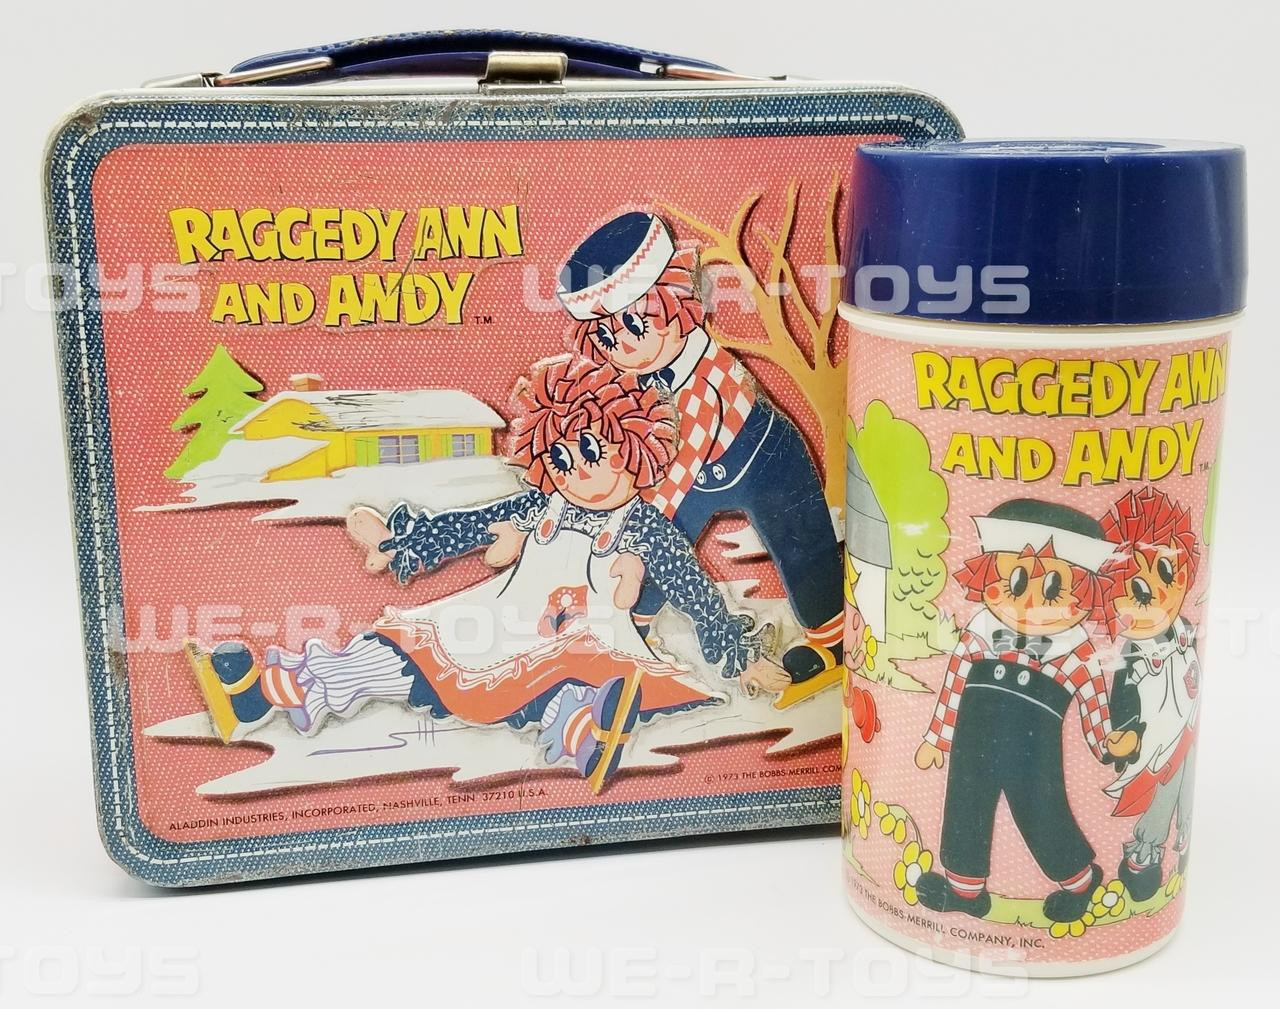 https://cdn11.bigcommerce.com/s-cy4lua1xoh/images/stencil/1280x1280/products/12157/78417/raggedy-ann-and-andy-tin-metal-lunchbox-and-thermal-cup-1973-aladdin-used__15430.1654905995.jpg?c=1